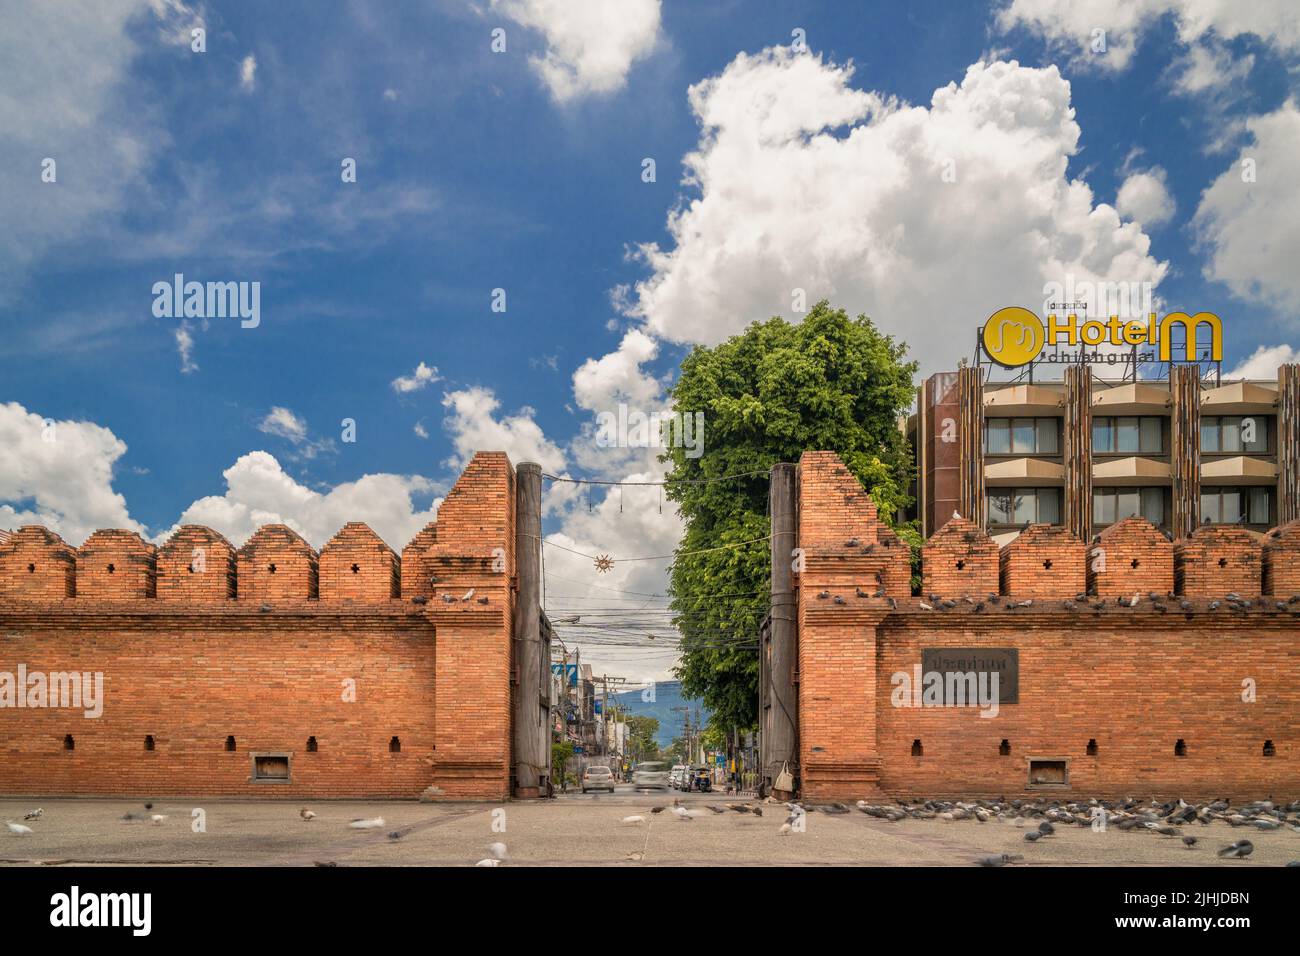 Chiang Mai, Thailand - 18 July 2022 - Time lapse view of the famous tourist location Tha Phae Gate in Chiang Mai, Thailand Stock Photo